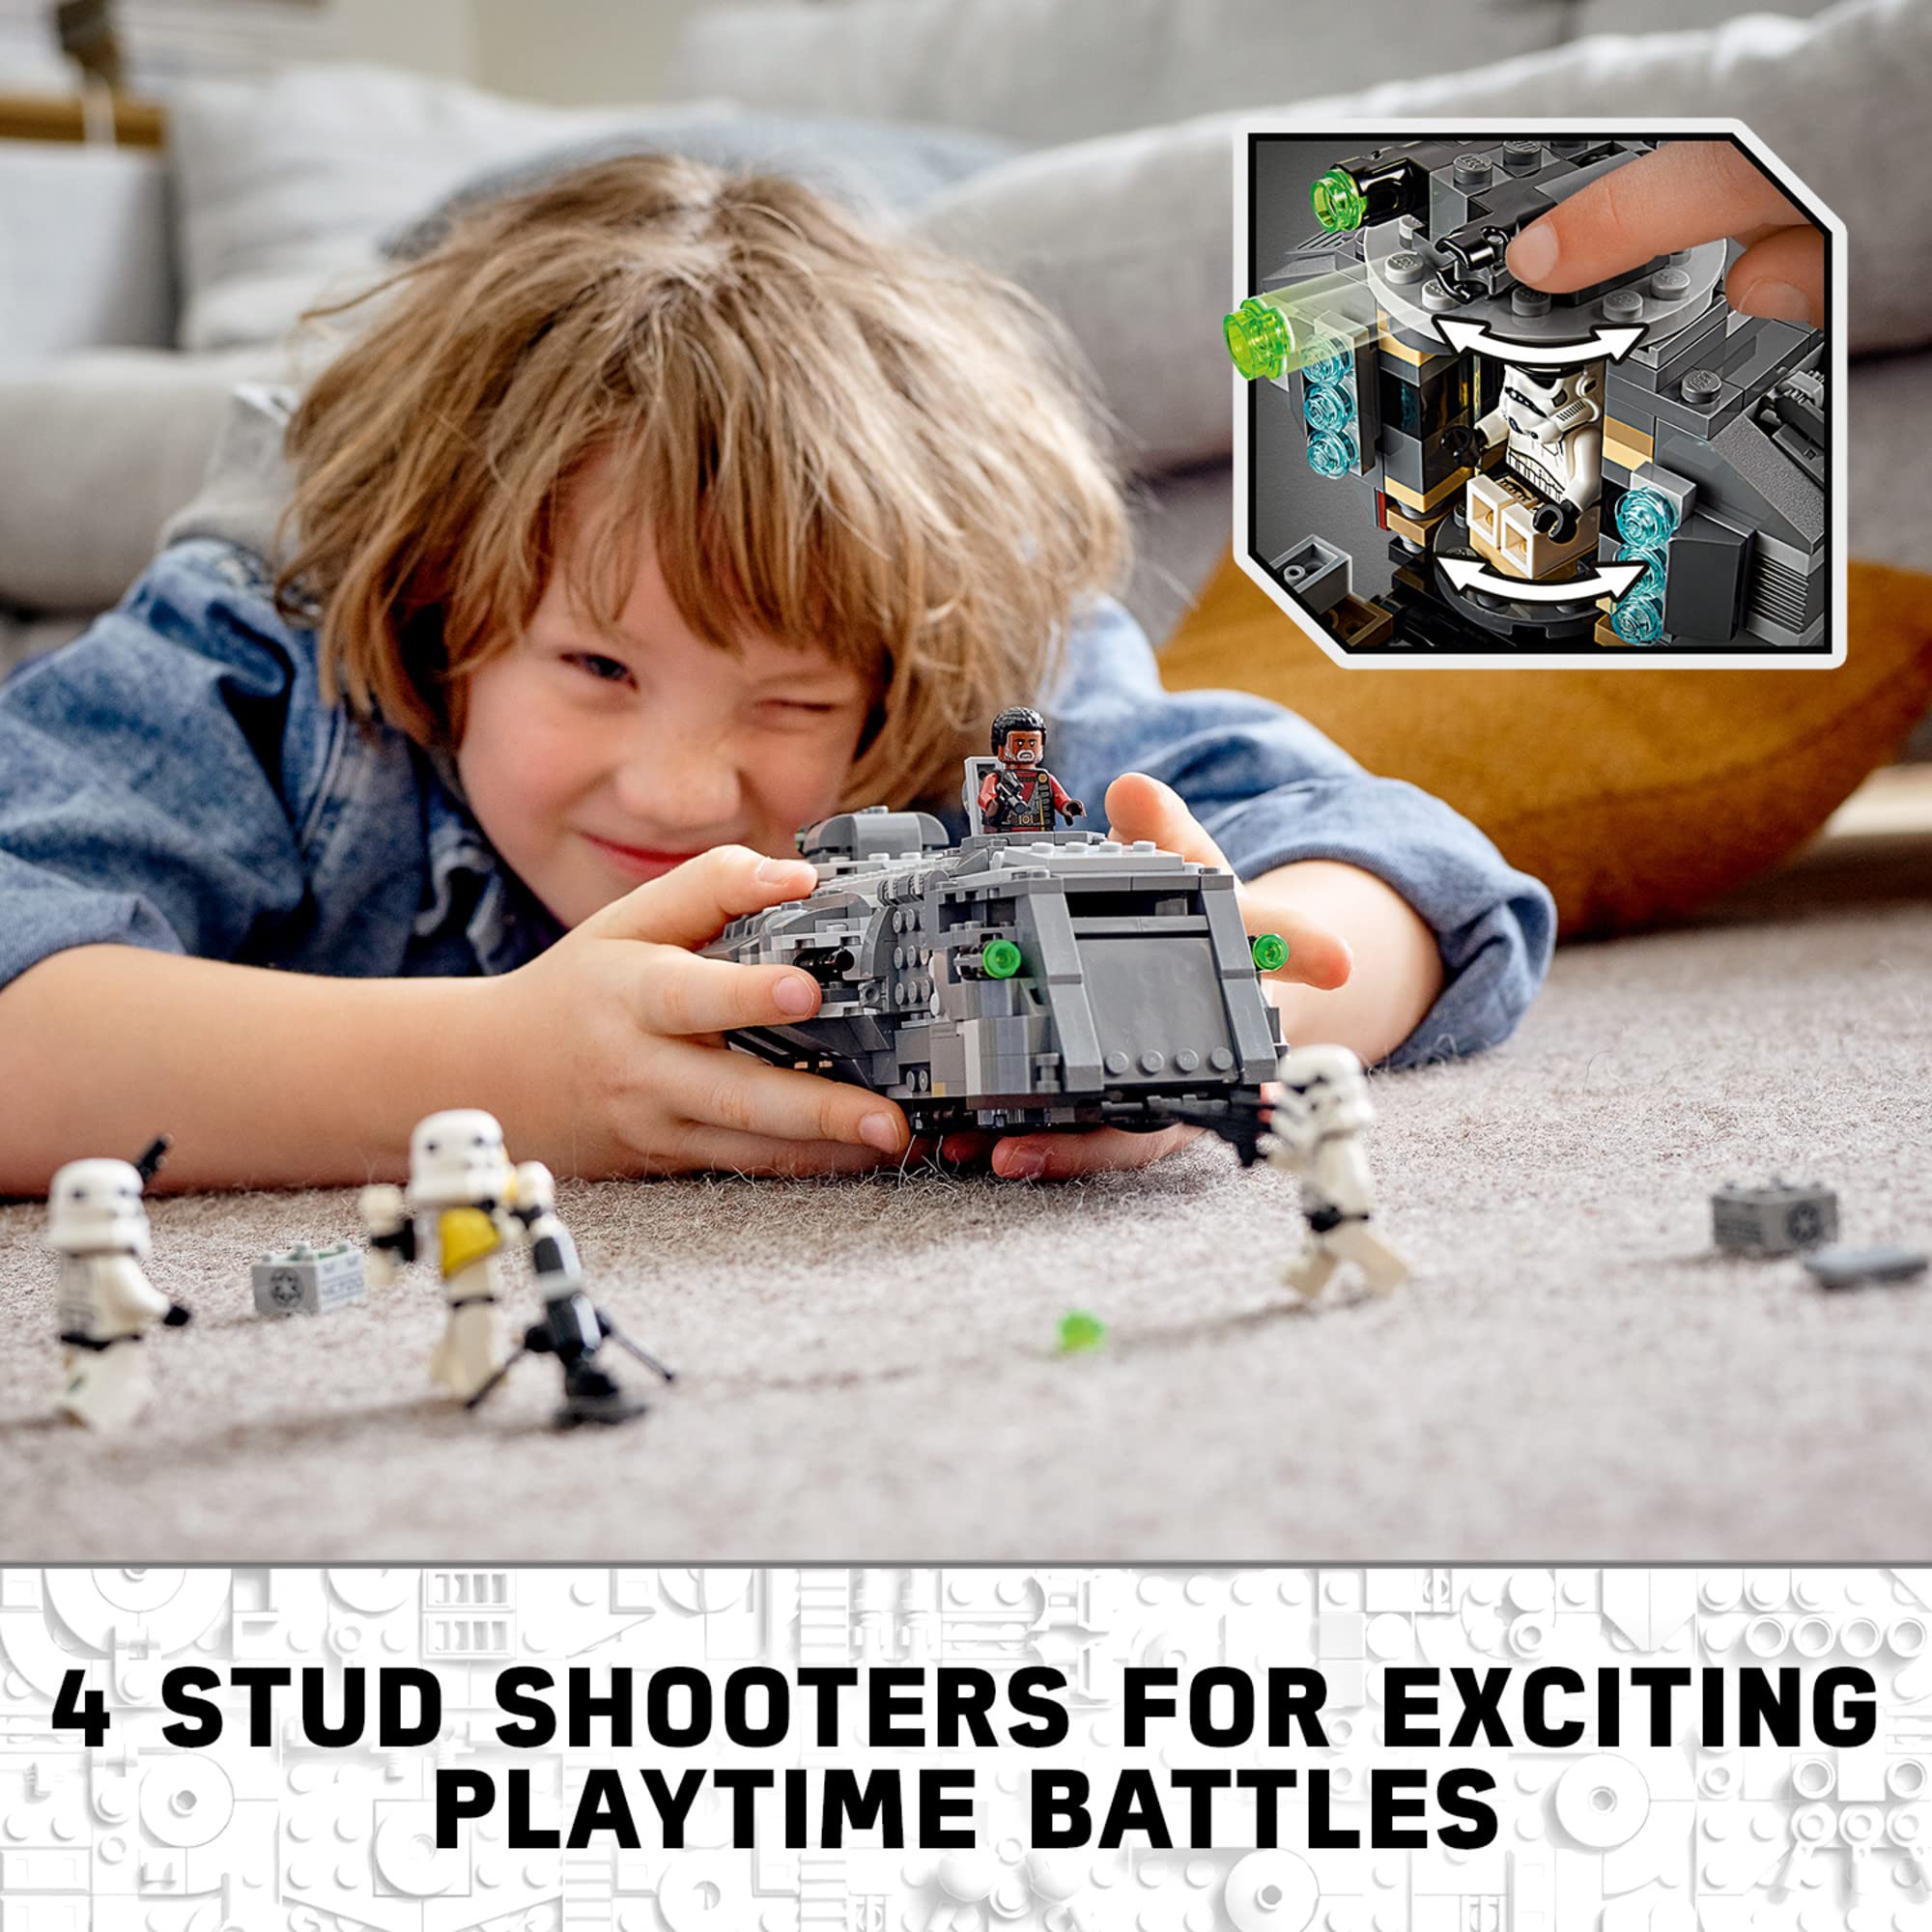 LEGO Star Wars: The Mandalorian Imperial Armored Marauder 75311 Awesome Toy Building Kit for Kids with Greef Karga and Stormtroopers; New 2021 (478 Pieces)